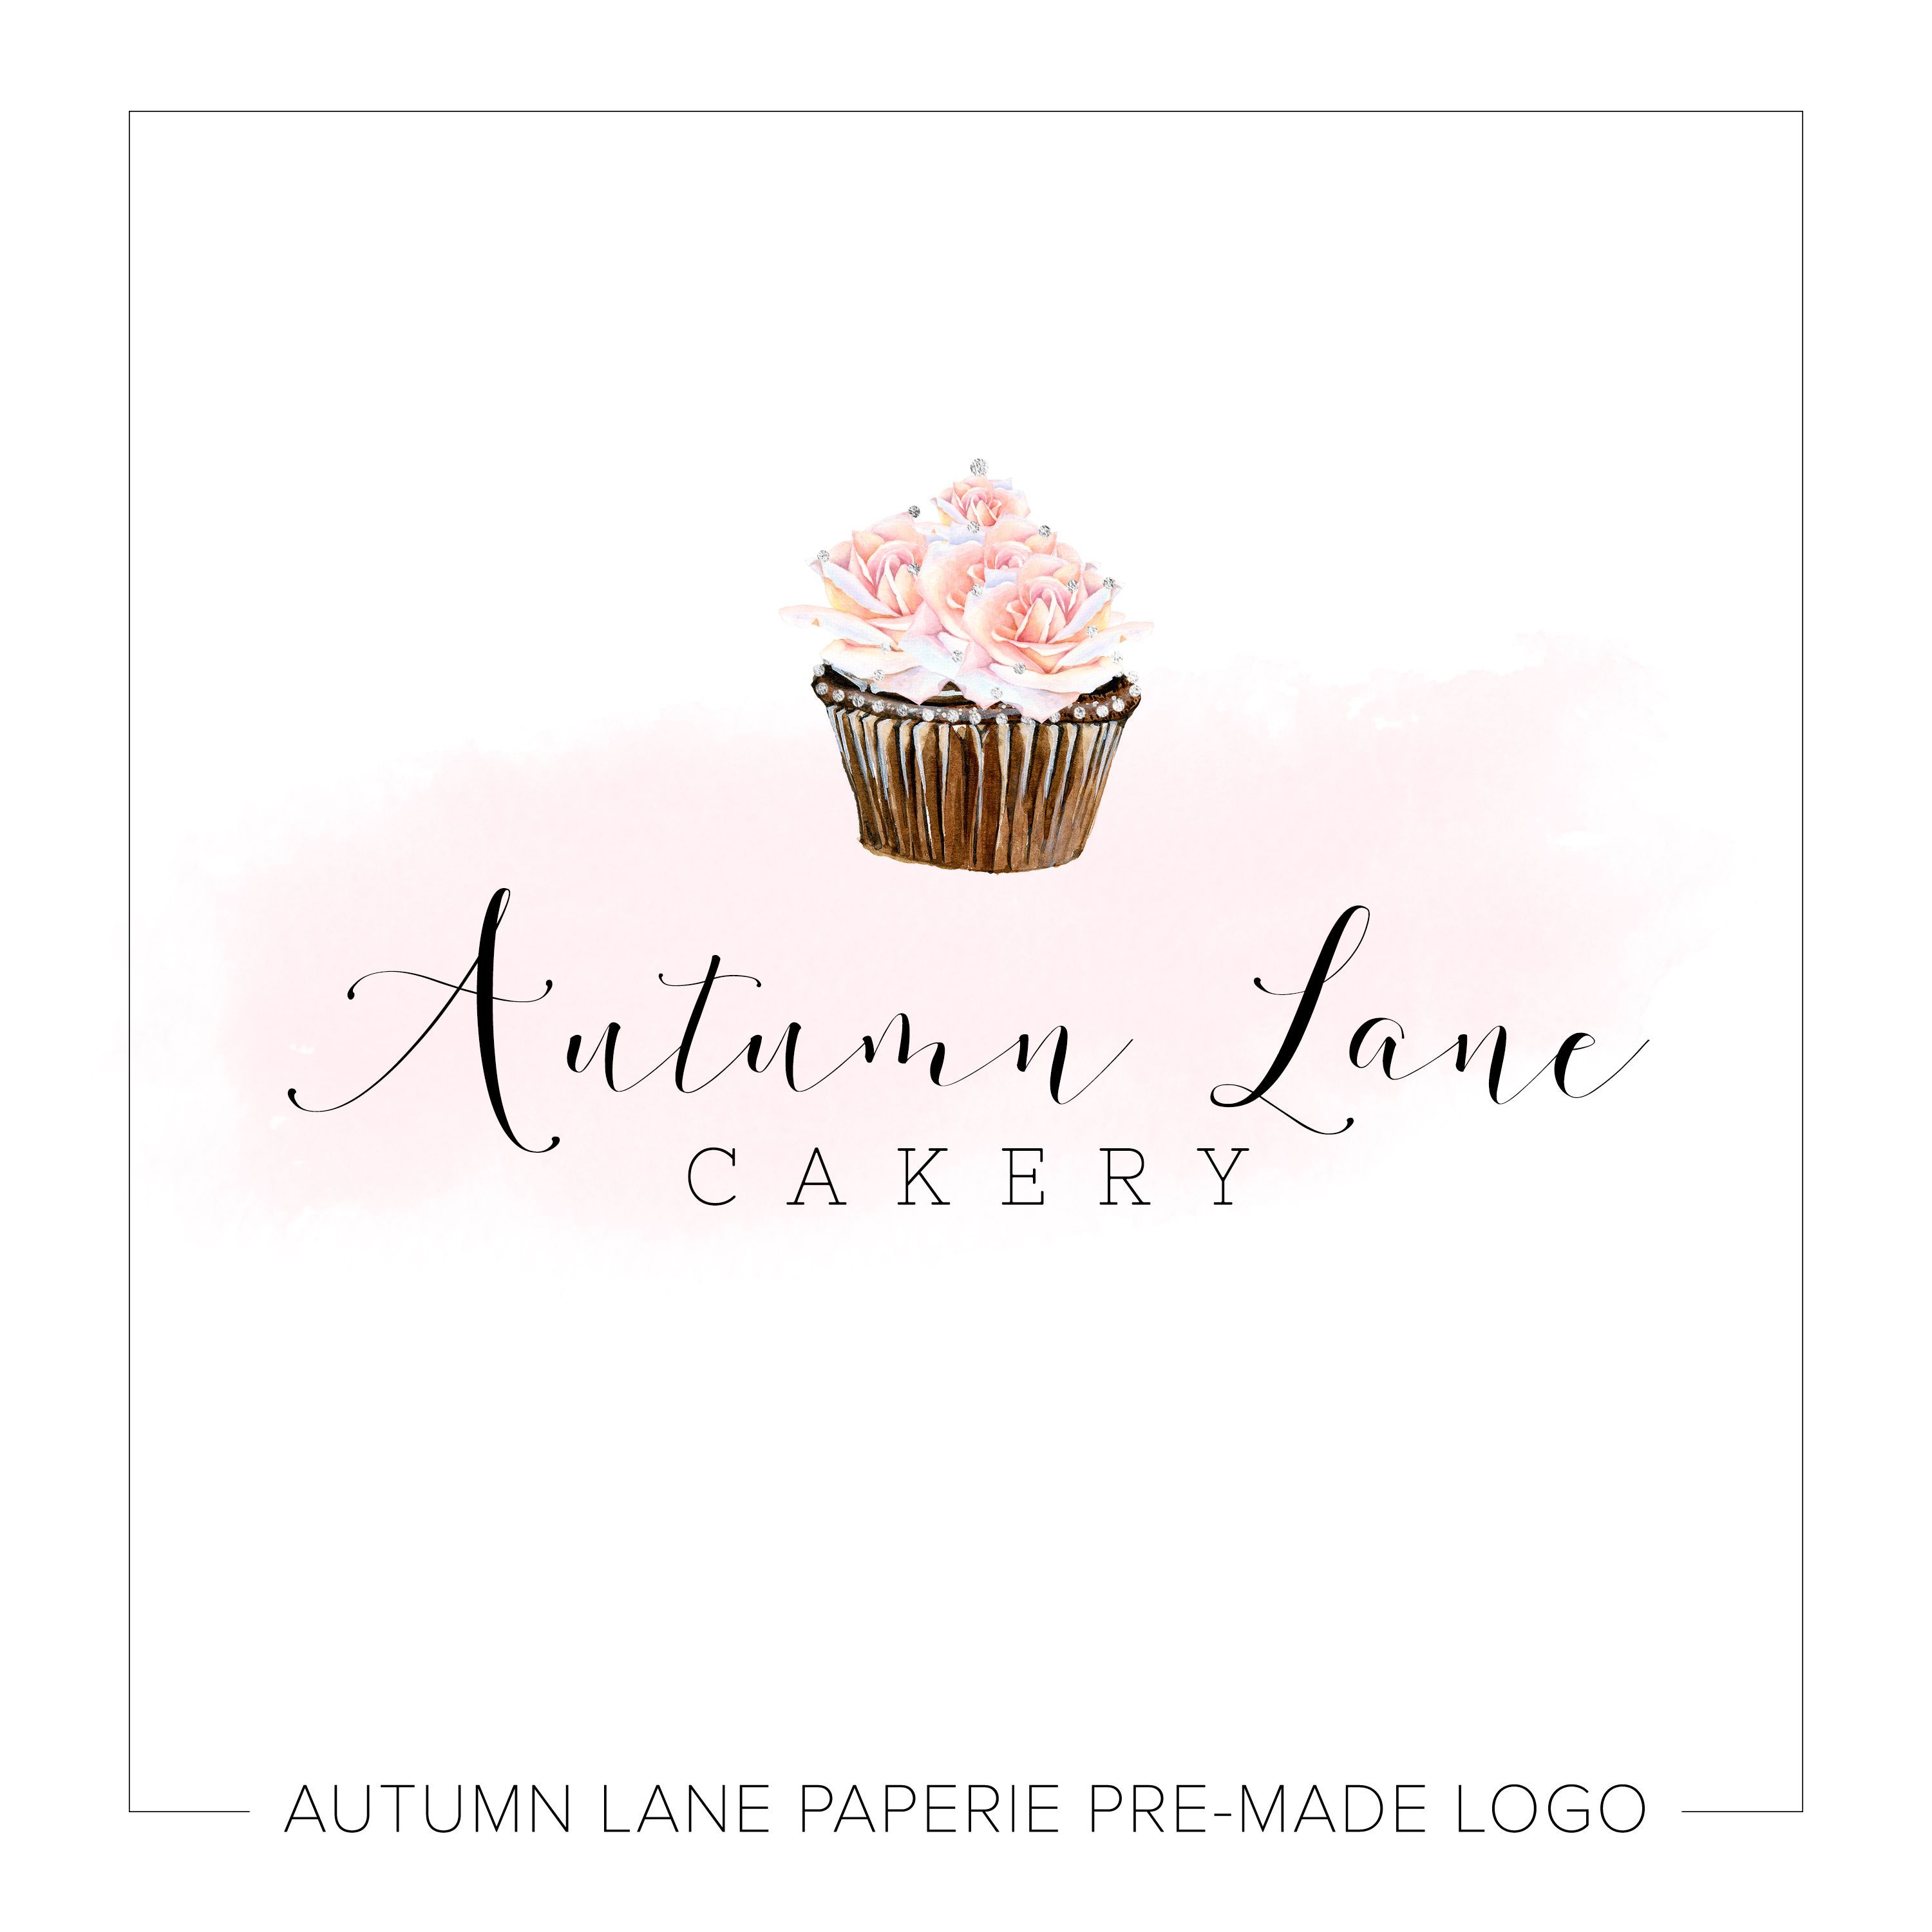 Floral Cupcake Bakery Logo K97 -   16 Event Planning Logo products
 ideas